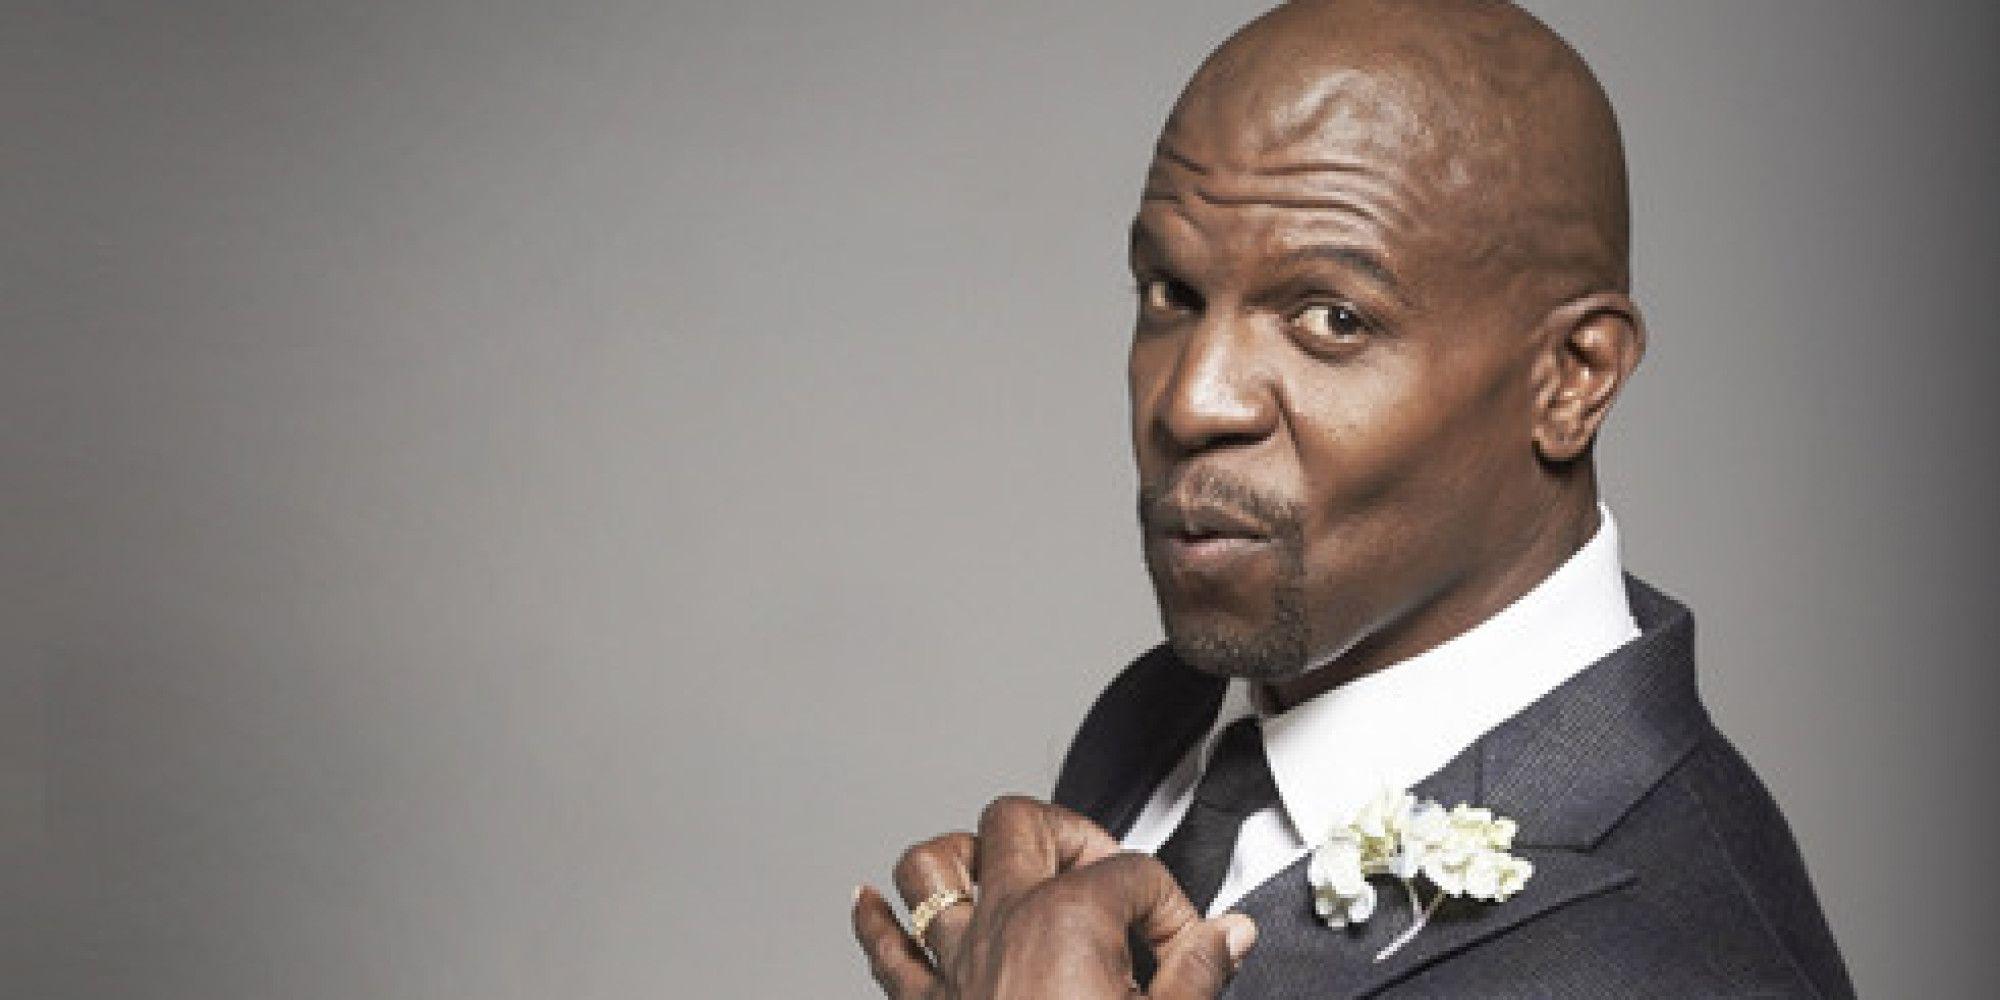 Terry Crews Wallpaper Image Photo Picture Background